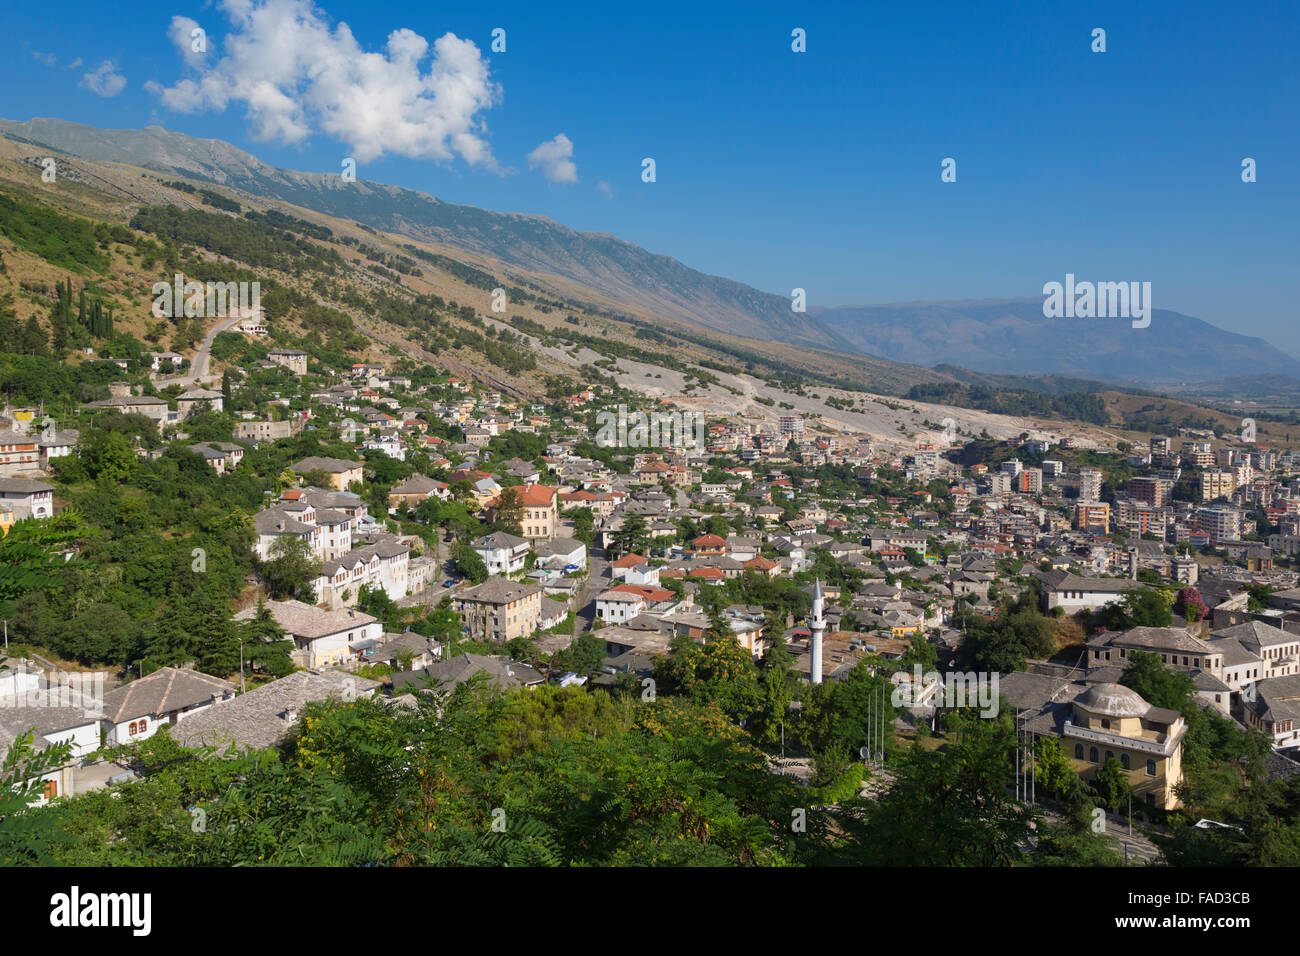 Gjirokastra or Gjirokaster, Albania.  Looking across the typical architecture of the old town to new suburbs beyond. Stock Photo